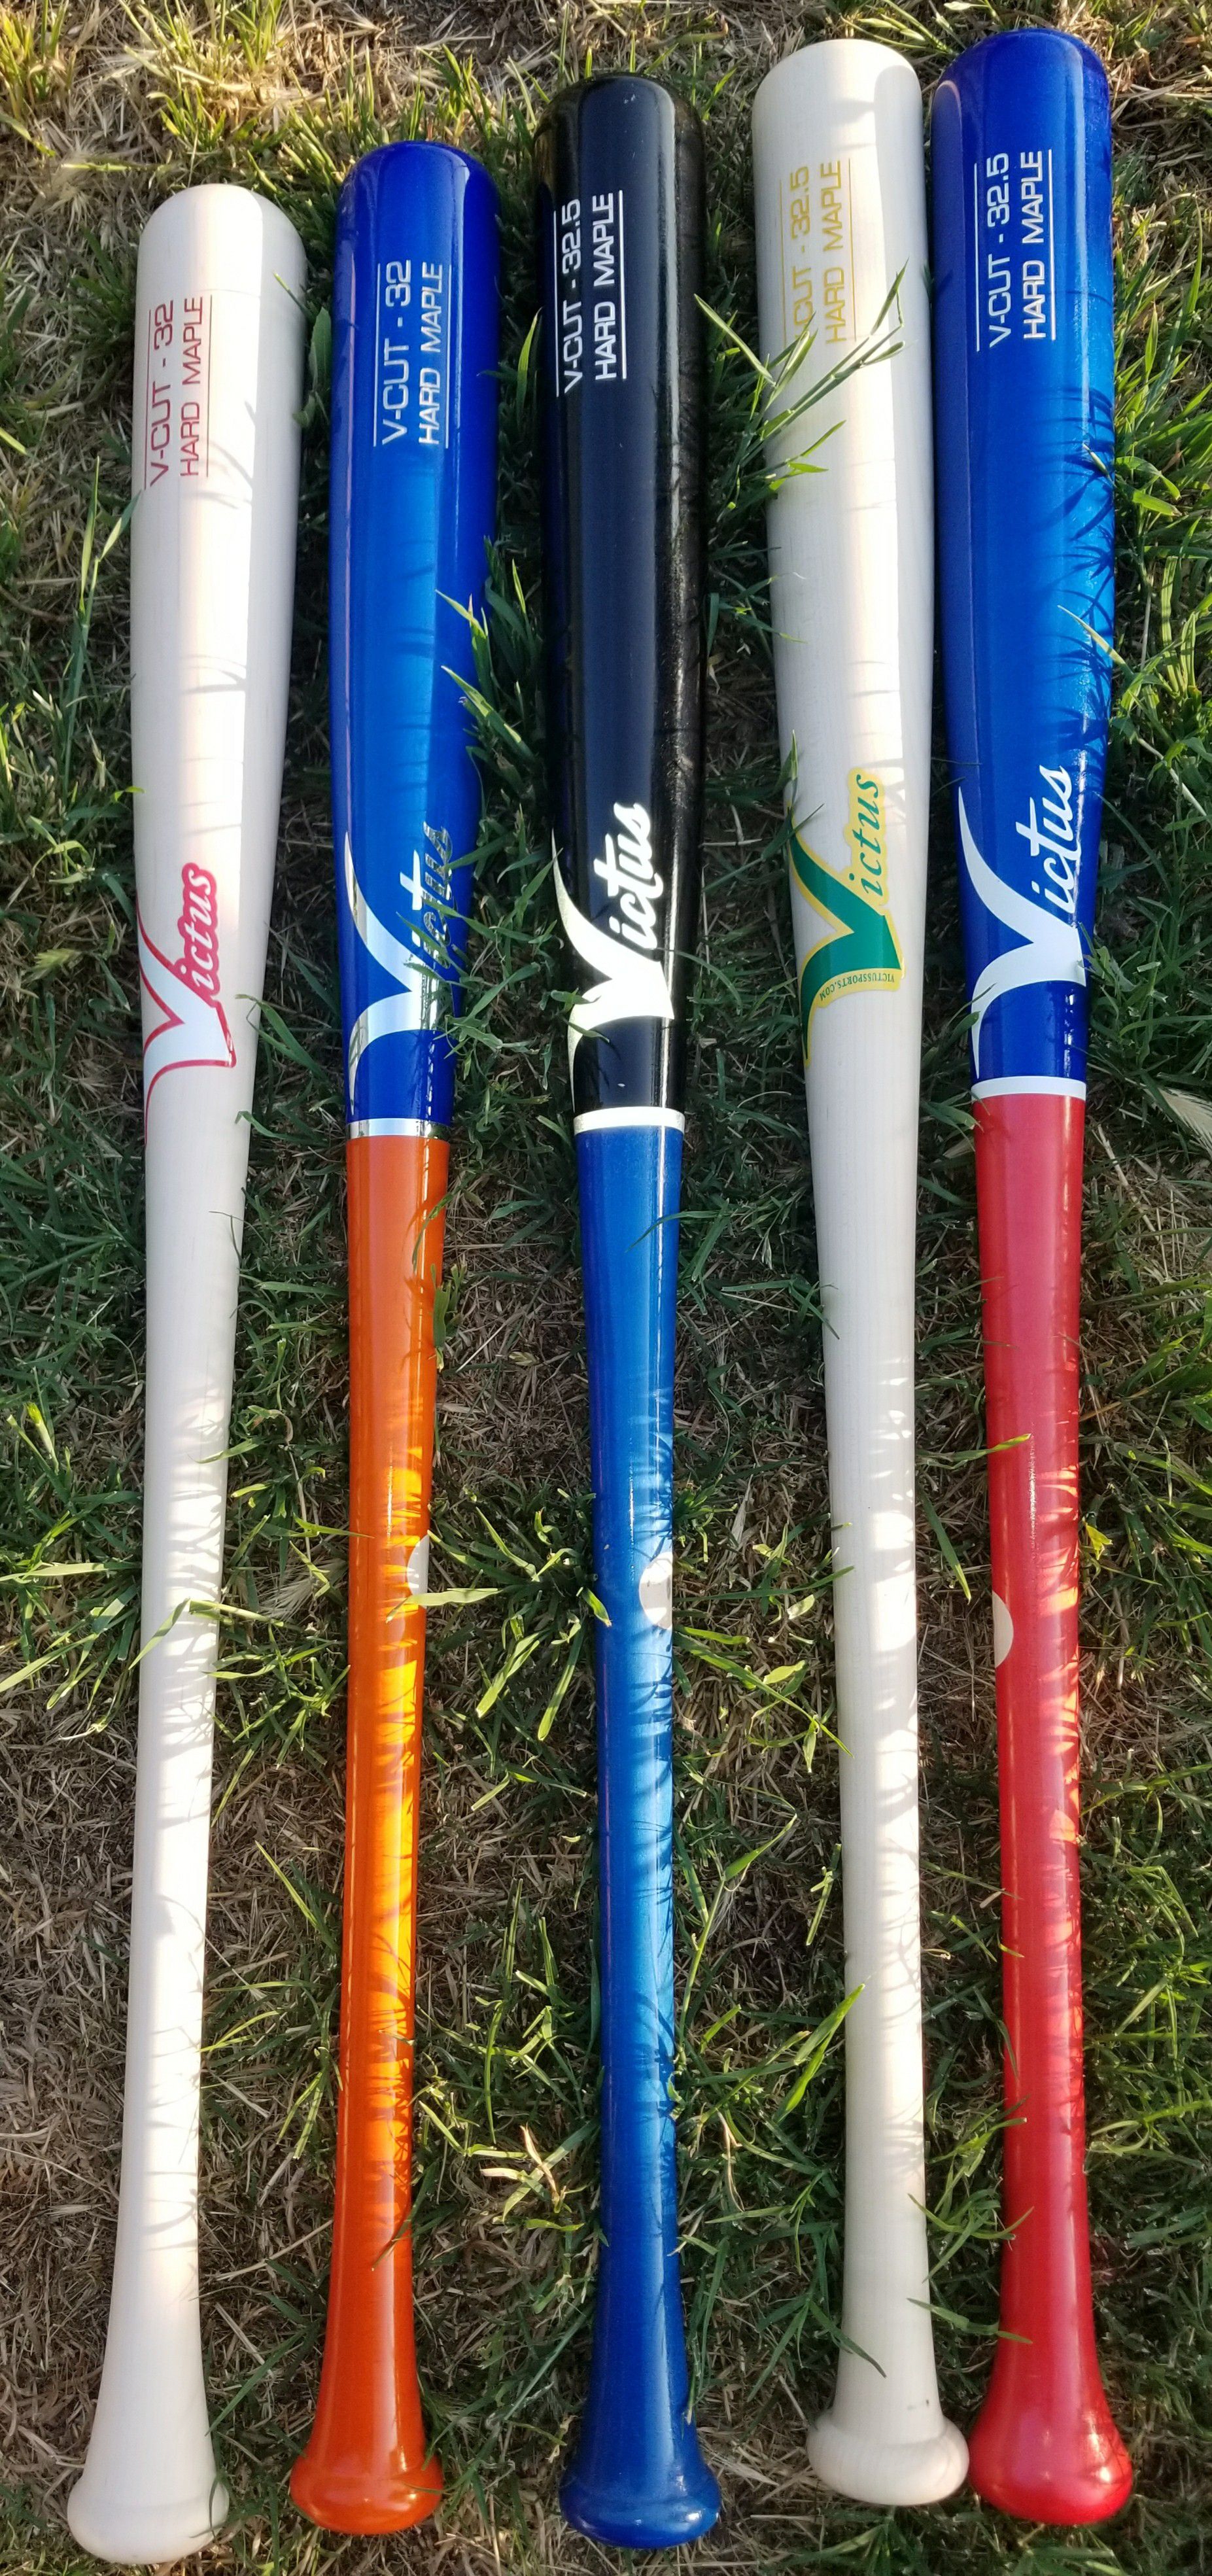 Brand New Victus Pro Model Hard Maple Ink Dot Wood Baseball Bats 32", 32.5" What Color You Like.